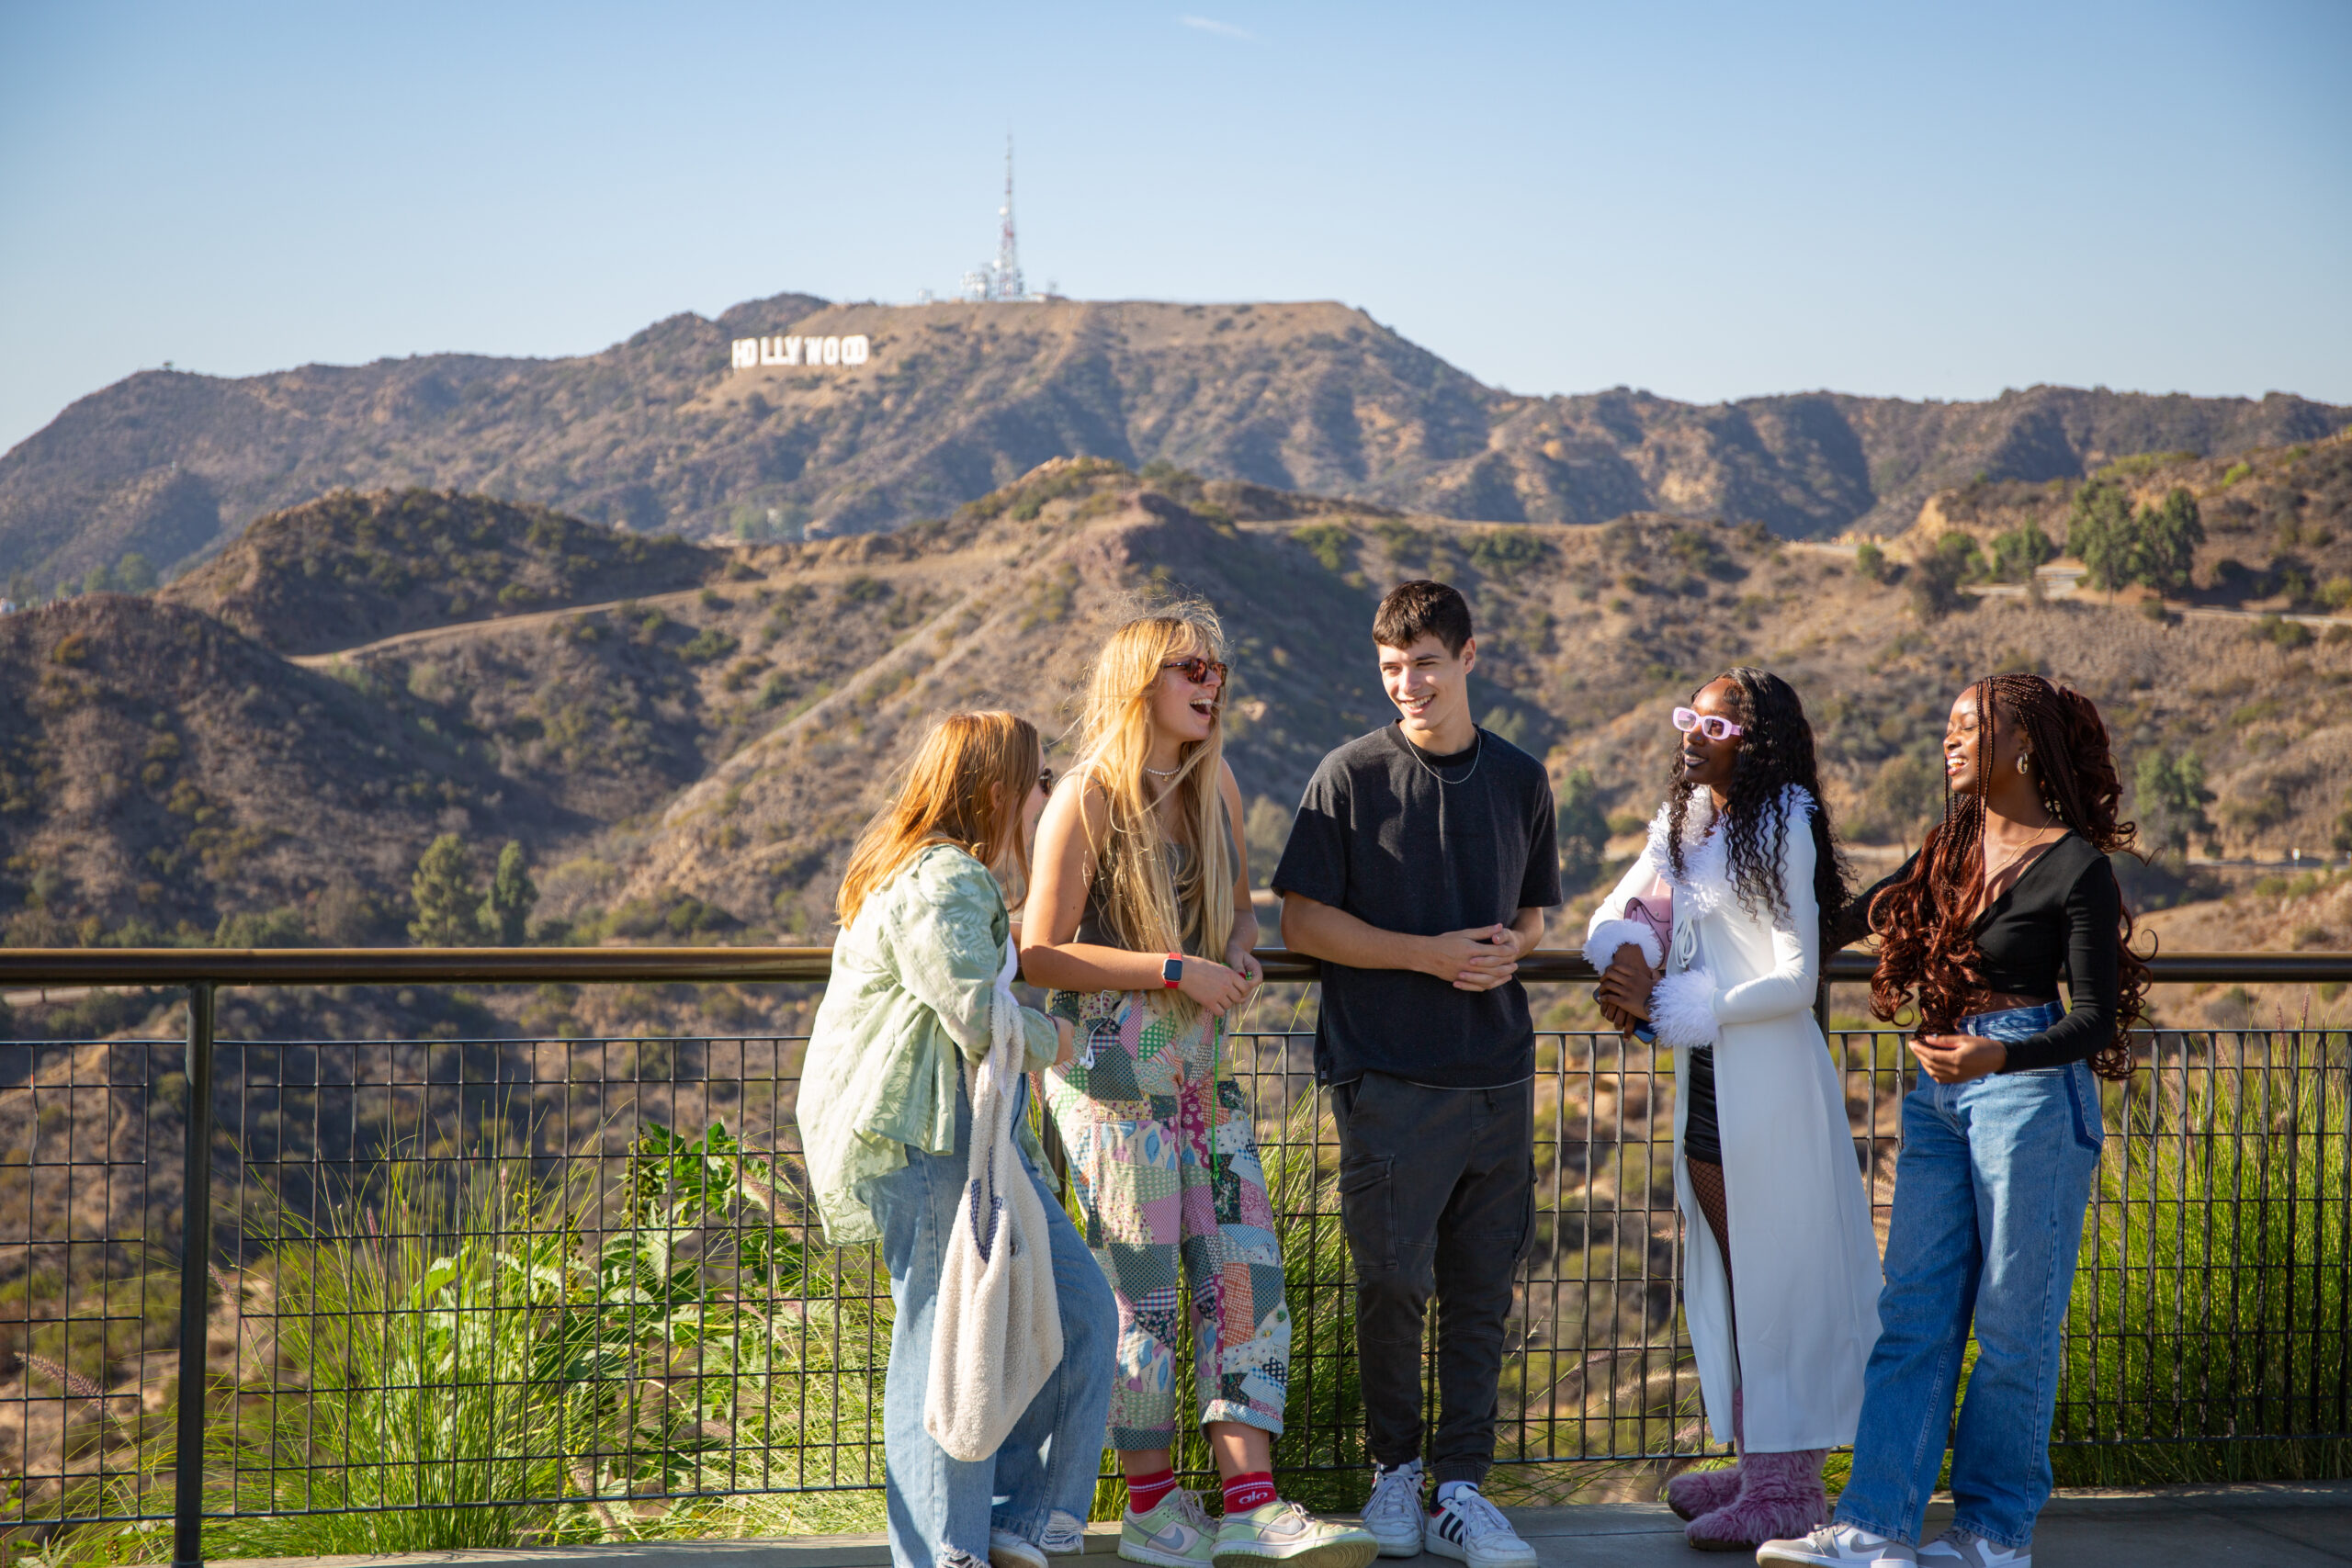 A group of students hanging out in LA. The Hollywood sign is visible in the distance.